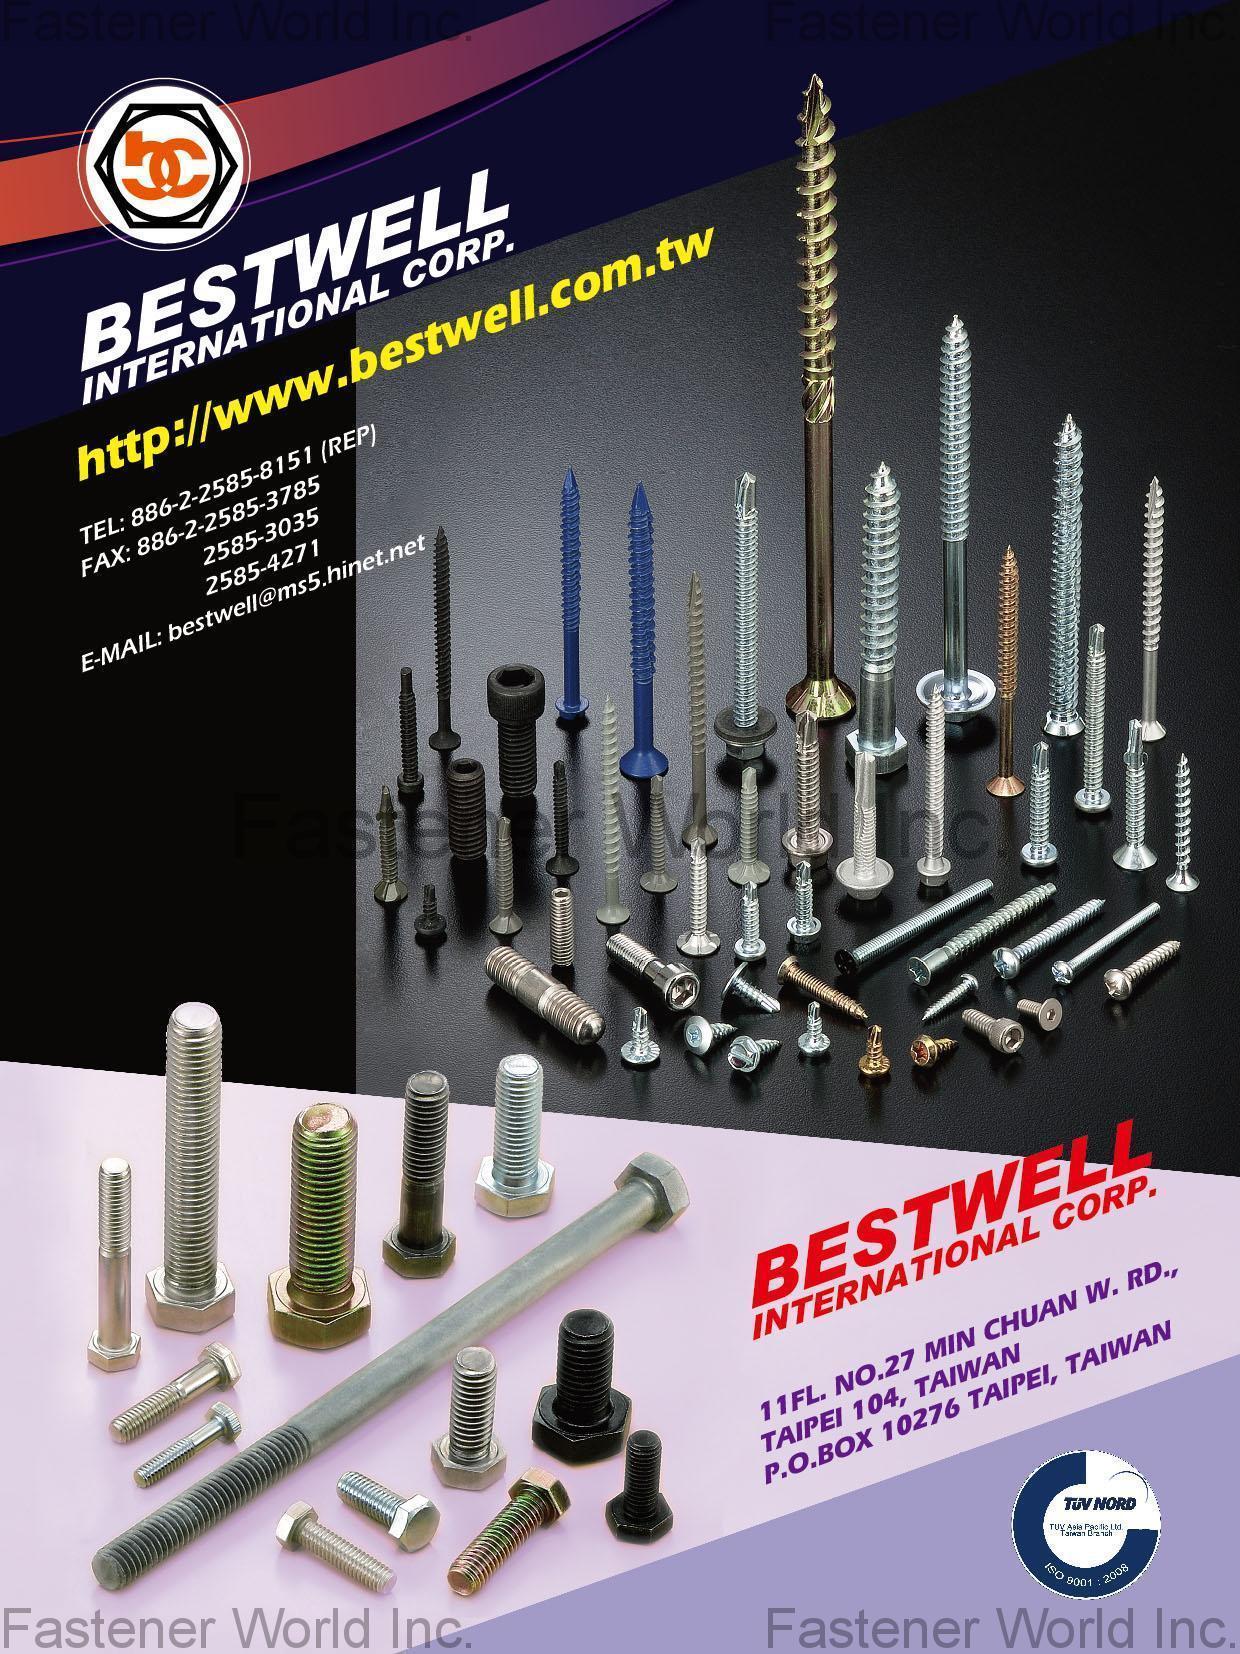 BESTWELL INTERNATIONAL CORP.  , HEX BOLT, SQUARE BOLT, CARRIAGE BOLT, FLANGE BOLT, SOCKET HEAD CAP SCREW, SET SCREW, SHACKLE BOLT, CUP BOLT, ALL THREAD STUD, OVAL NECK, SQUARE NECK, GAS BOLT, T-HEAD BOLT, SINGLE END STUD, T/S & M/S, SELF DRILLING SCREW, DWS & CHIPBOARD SCREW, SCREW WITH BONDER WASHER, SECURITY SCREW, SEM SCREW, SEPCIAL SERRATION SCREW, NUT, LOCK NUT, TEFLON COATING NUT, NON-STANDARD & OTHERS, FLAT WASHER, LOCK WASHER, SQUARE WASHER, SOLID WASHER, ANCHOR, STAMPING, SPECIAL FASTENERS, D-RING & RINGS, CNC ITEMS, WIRE MESH, BUTT SEAM SPACER, PLASTIC OR RUBBER PARTS, POWDER METALLURGY, SPRING & CLIP , All Kinds of Screws